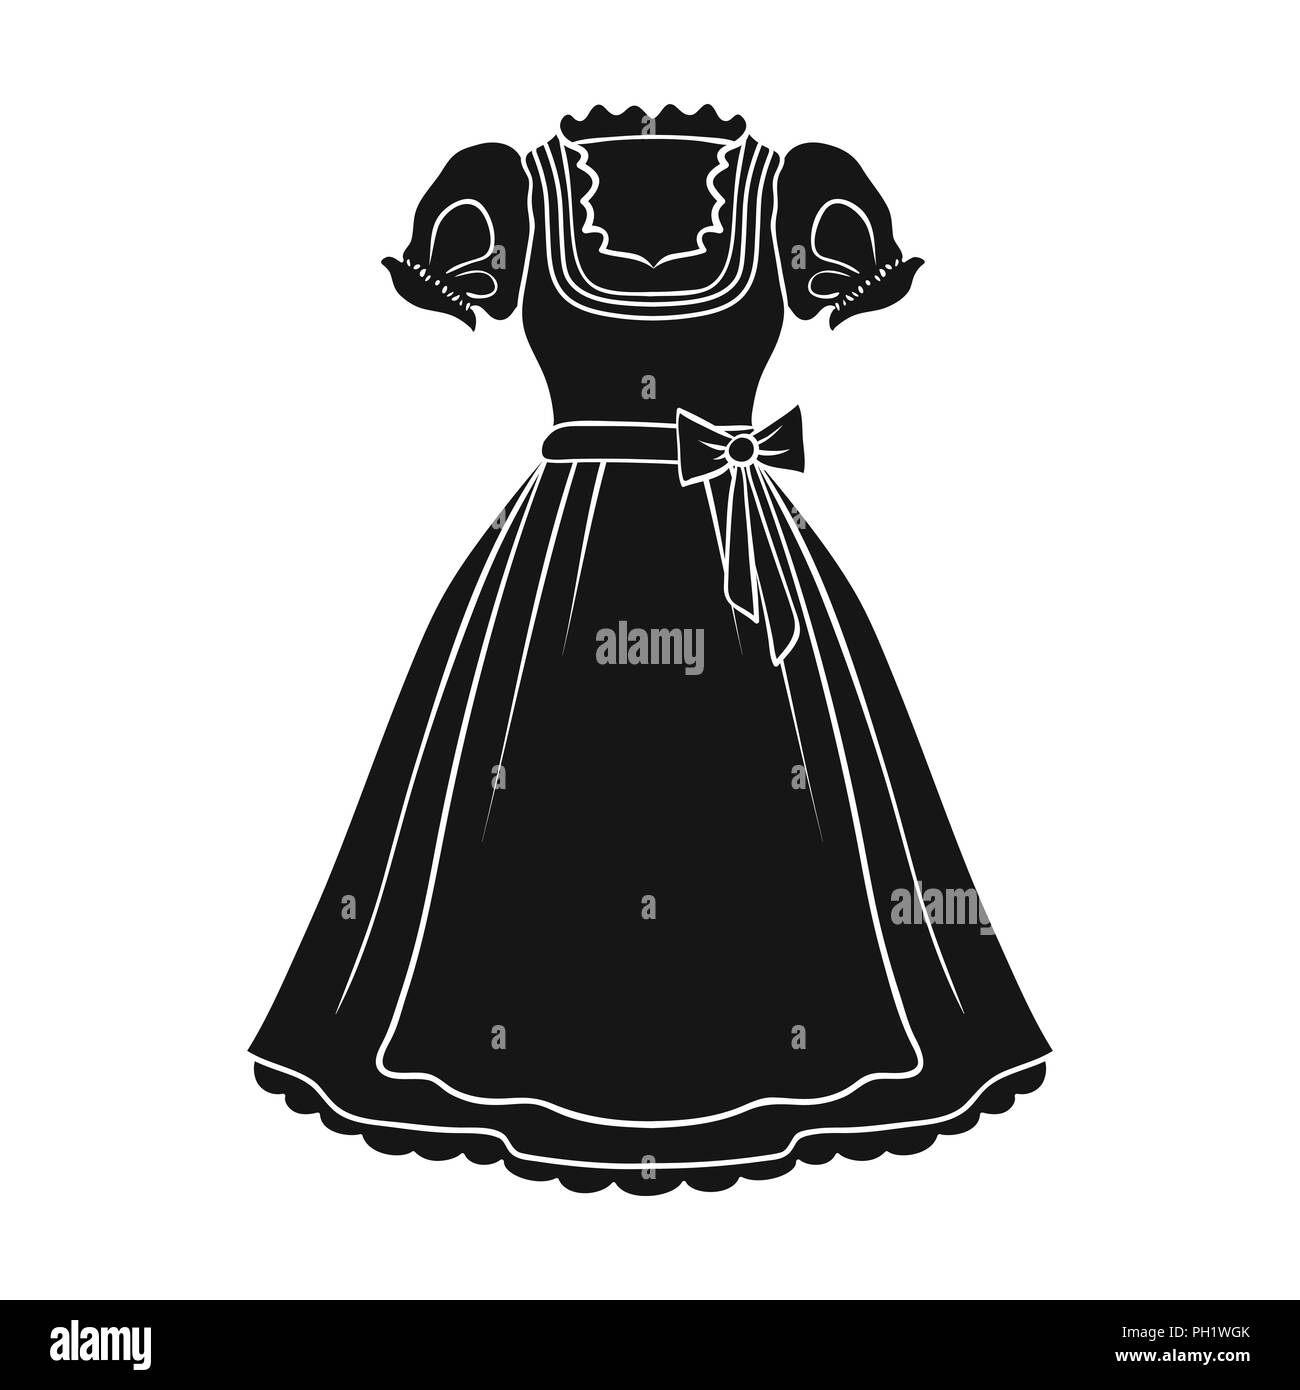 antique,apron,black,bow,clothing,coloring,costume,fabric,germany,history,holiday,icon,illustration,isolated,logo,model,national,ruffles,sarafan,shirt,sign,sleeves,symbol,textiles,vector,web, Vector Vectors , Stock Vector